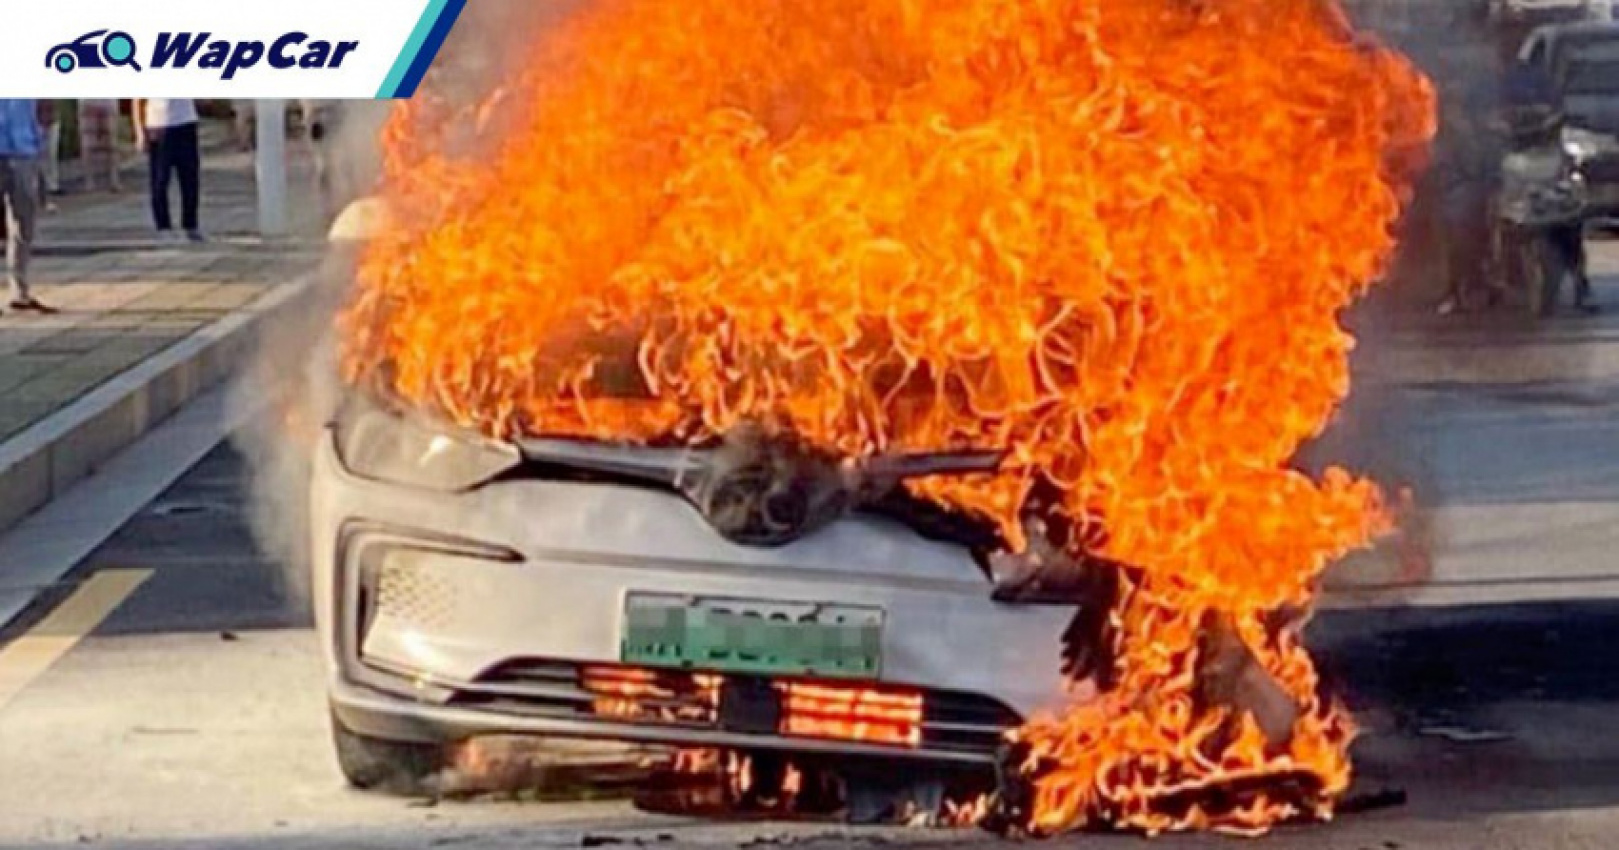 autos, cars, in china, 640 evs caught fire in the first quarter of 2022, up 32 percent